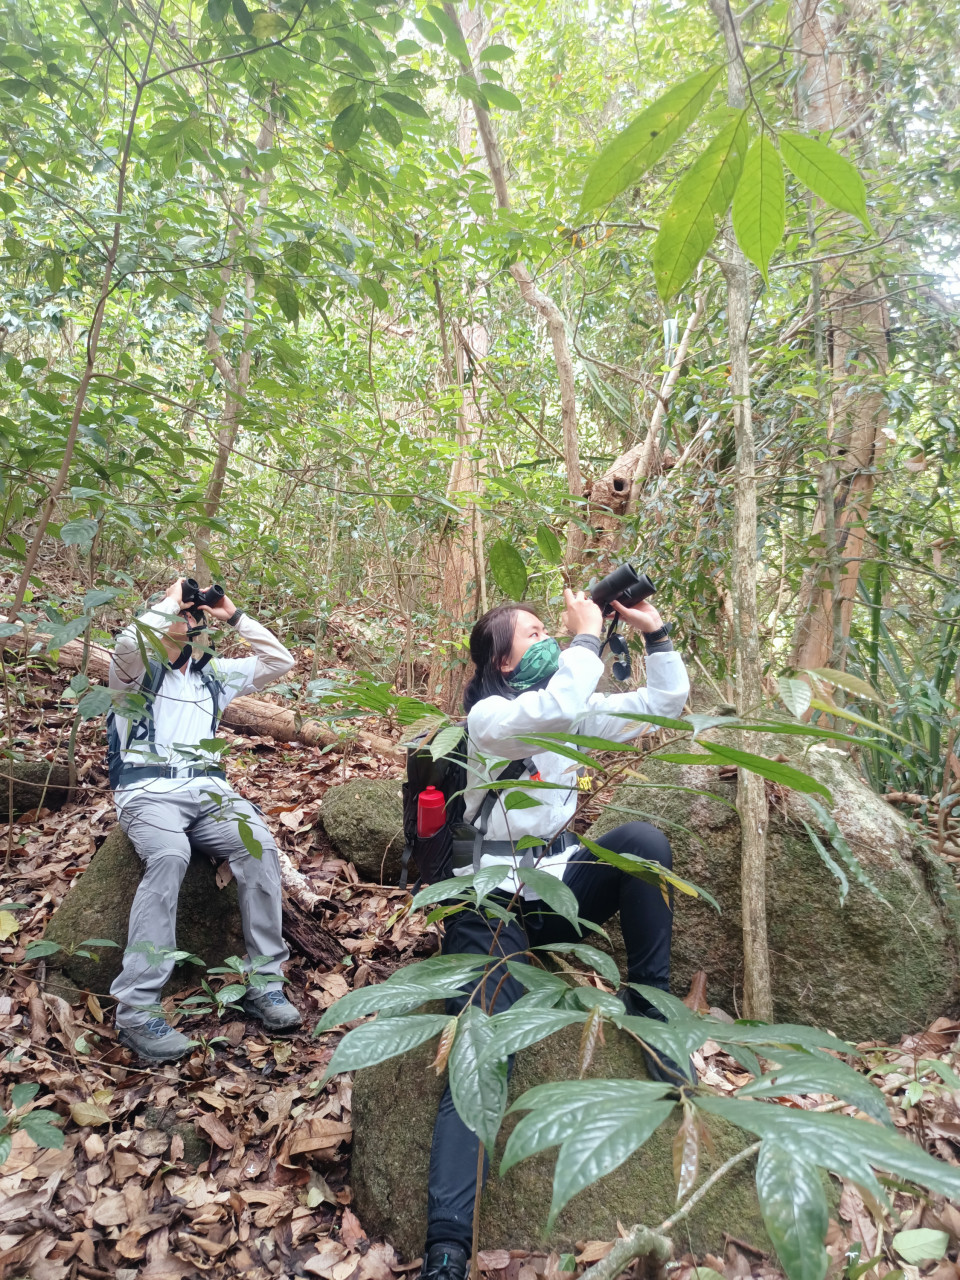 Yap and a colleague conducting fieldwork as part of her research. – Langur Penang Project